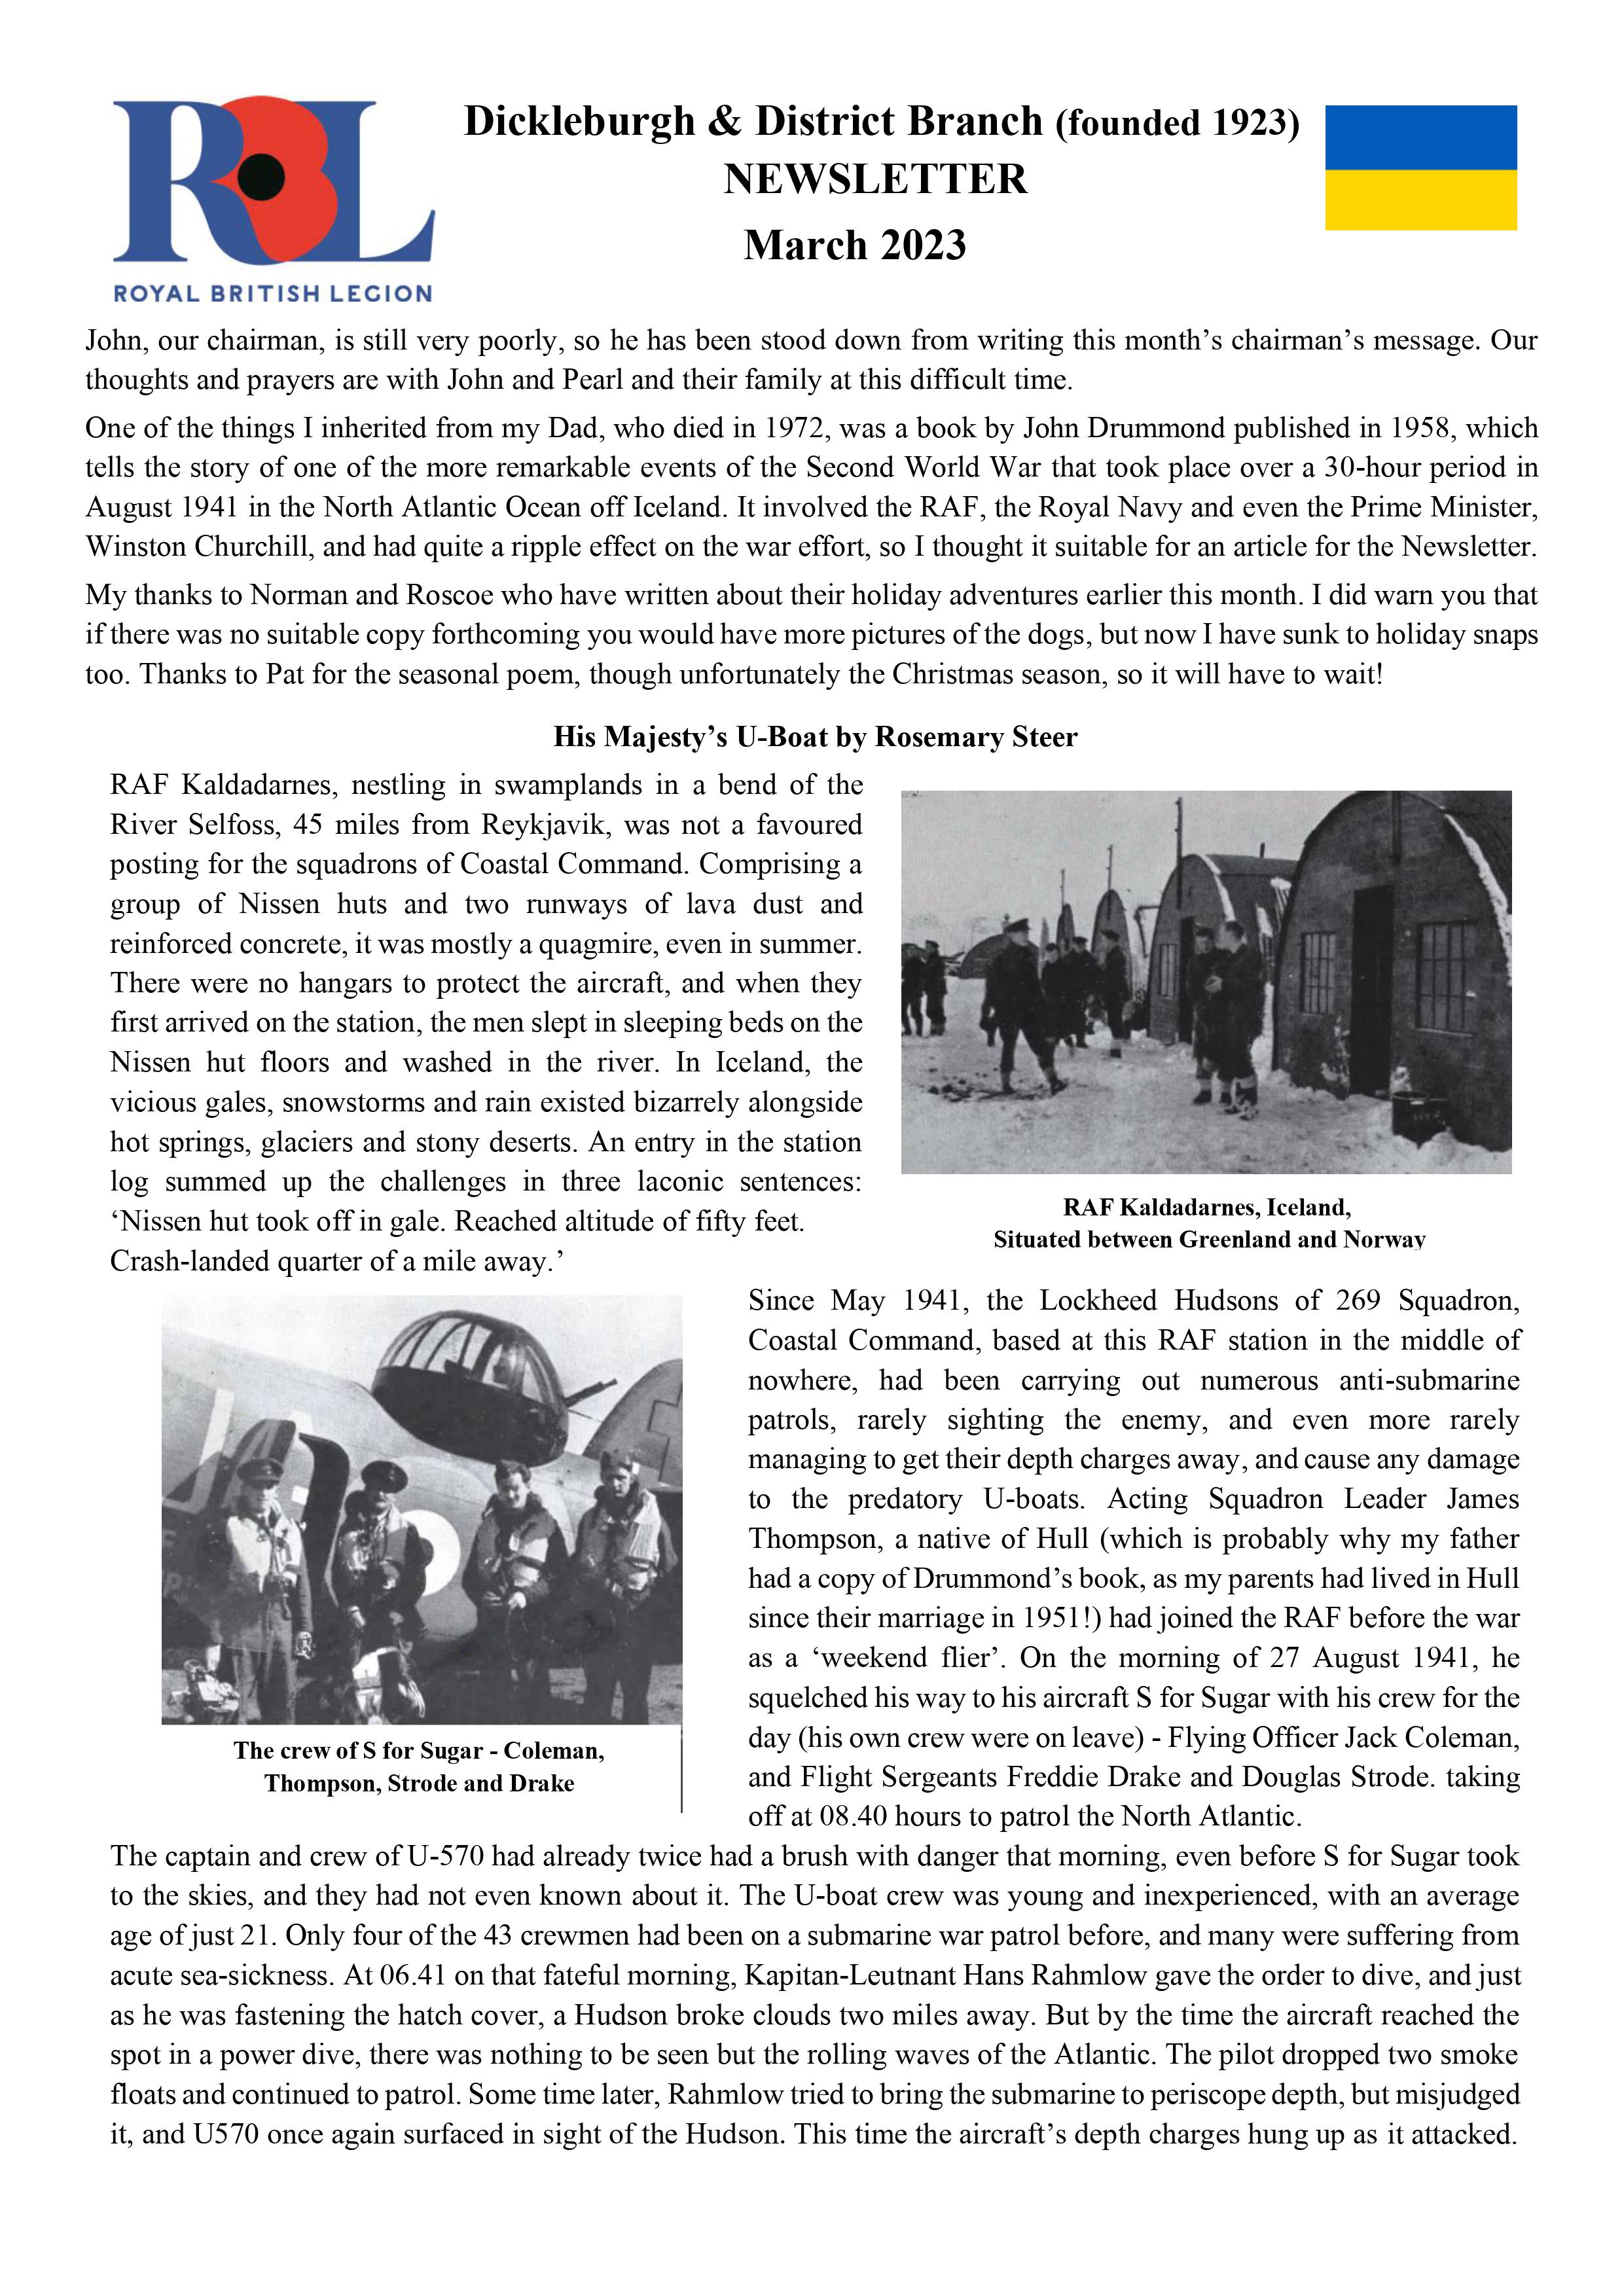 RBL - Dickleburgh & District Branch March 2023 Newsletter Page 1